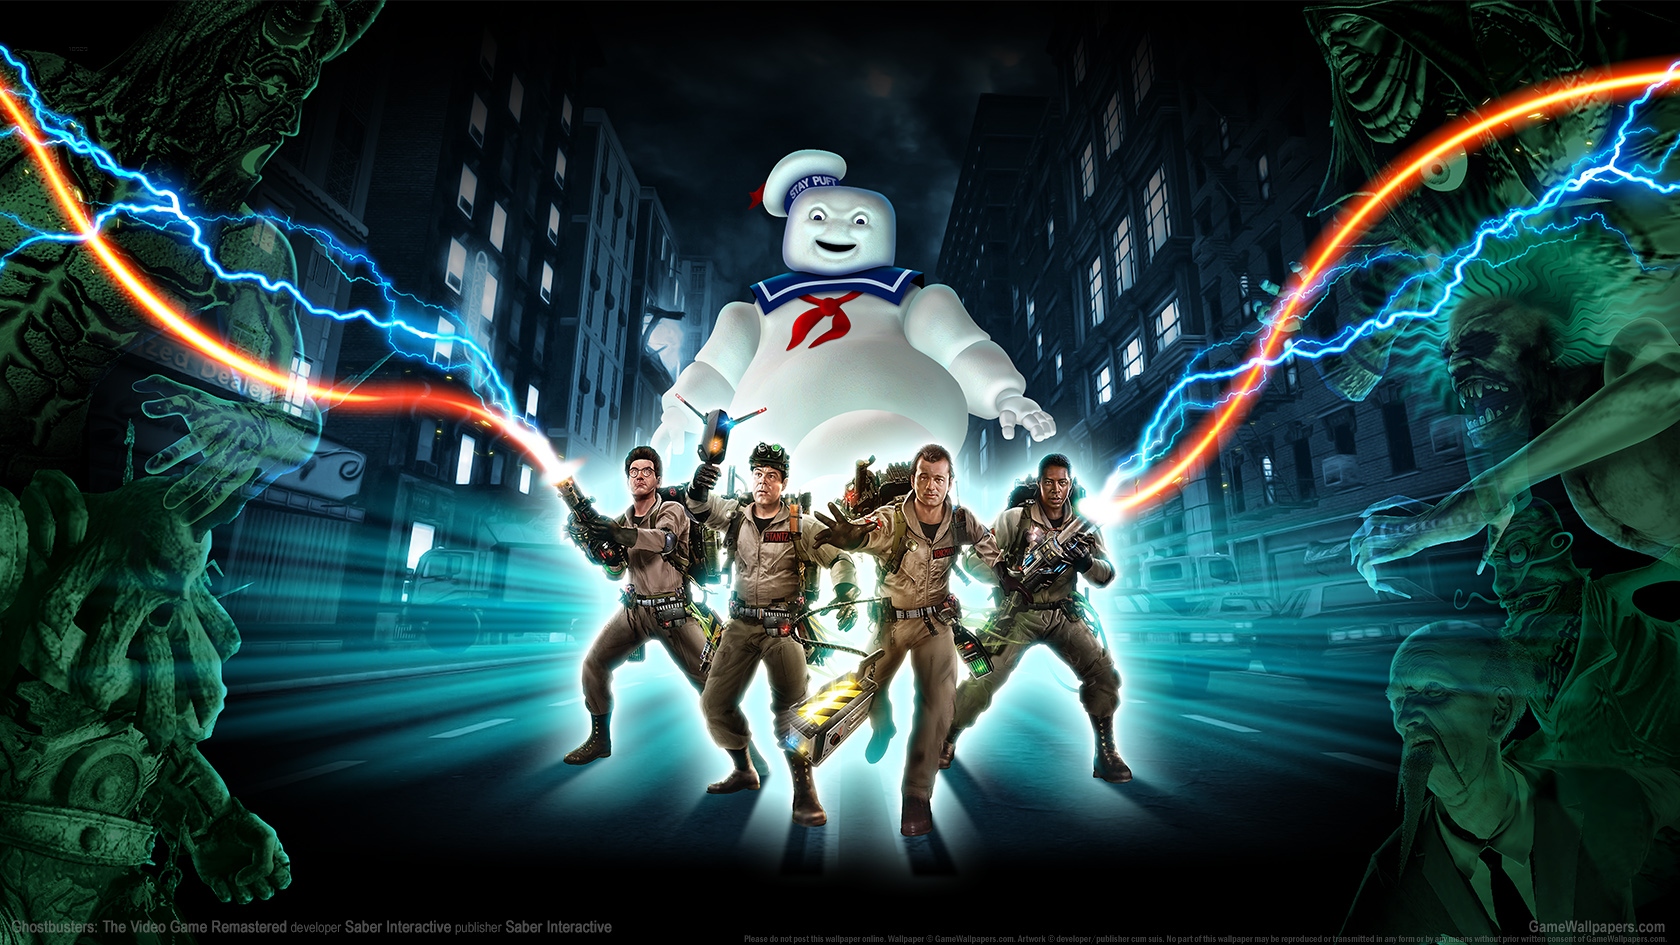 Ghostbusters: The Video Game Remastered 1680x945 wallpaper or background 01